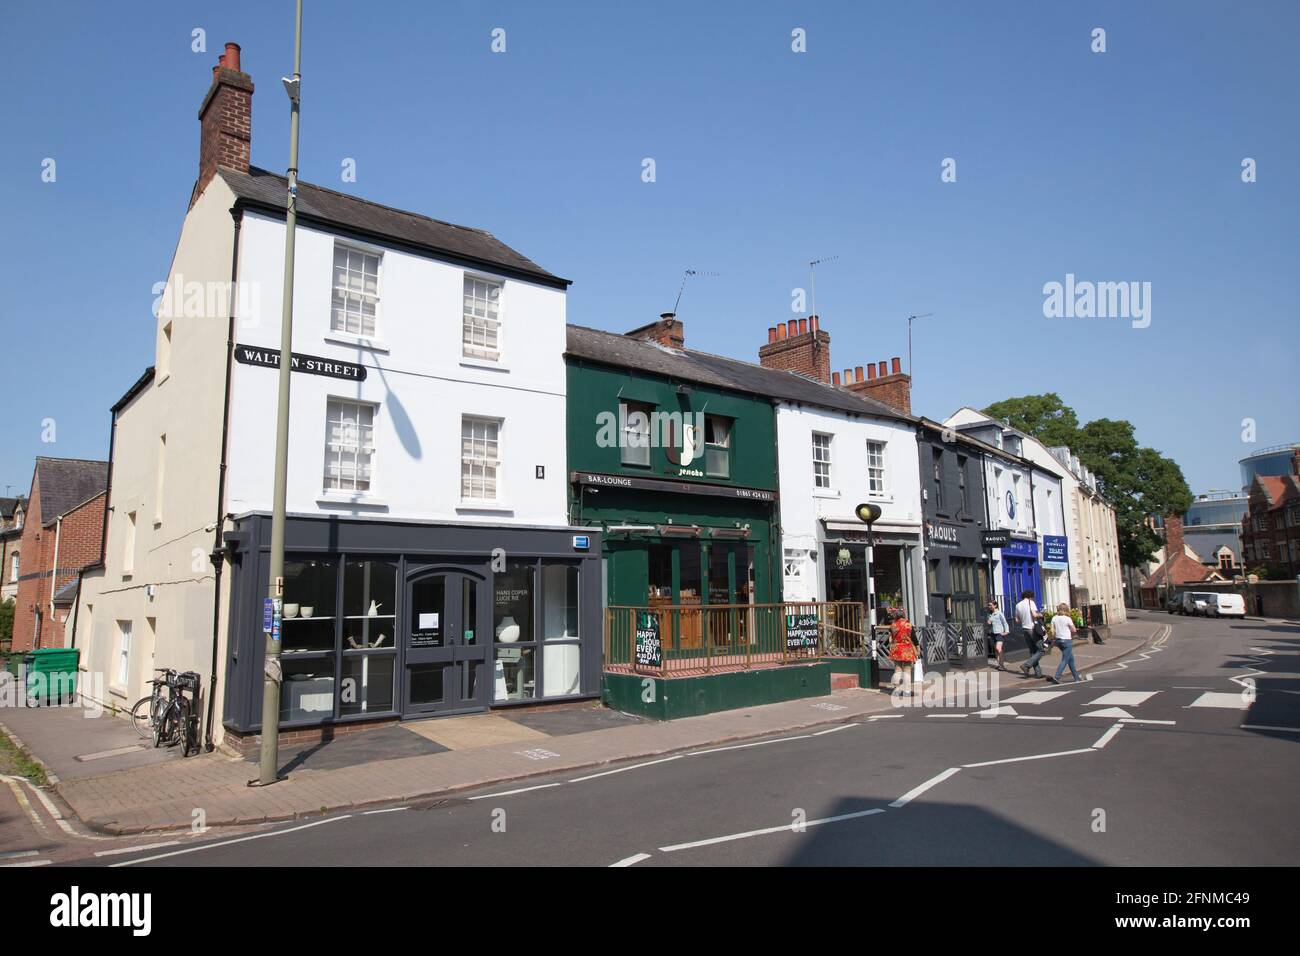 Commercial properties on Walton Street in Jericho, Oxford in the UK. Taken on the 24th June 2020. Stock Photo